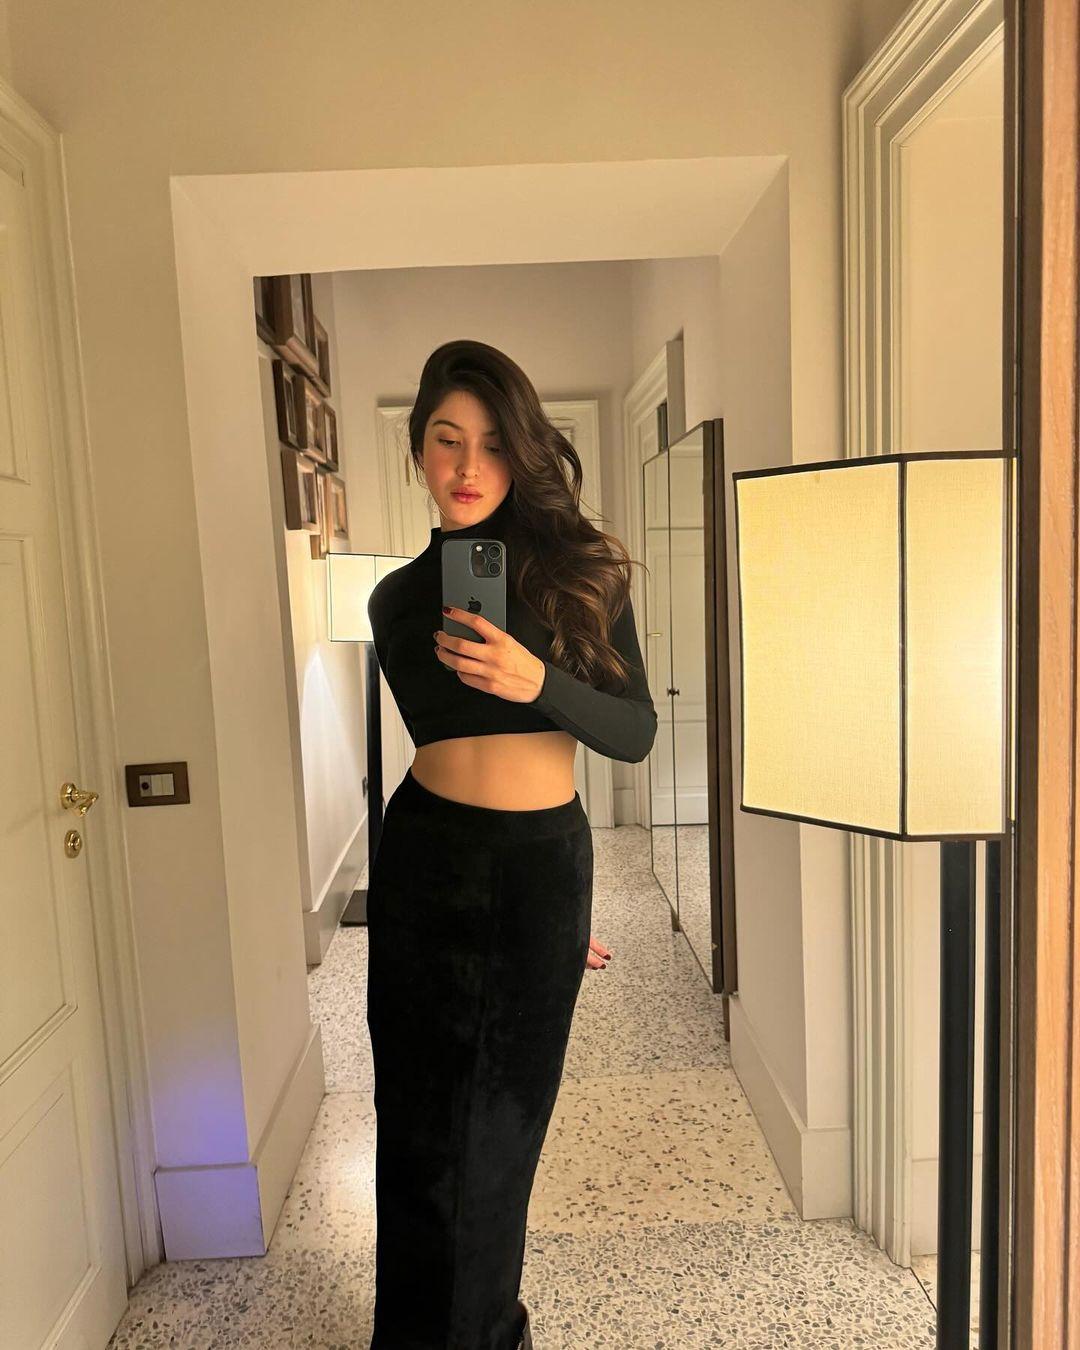 Shanaya Kapoor is currently vacationing abroad. The starlet has been dropping several looks over the weeks but this one co-ord ensemble caught our eye